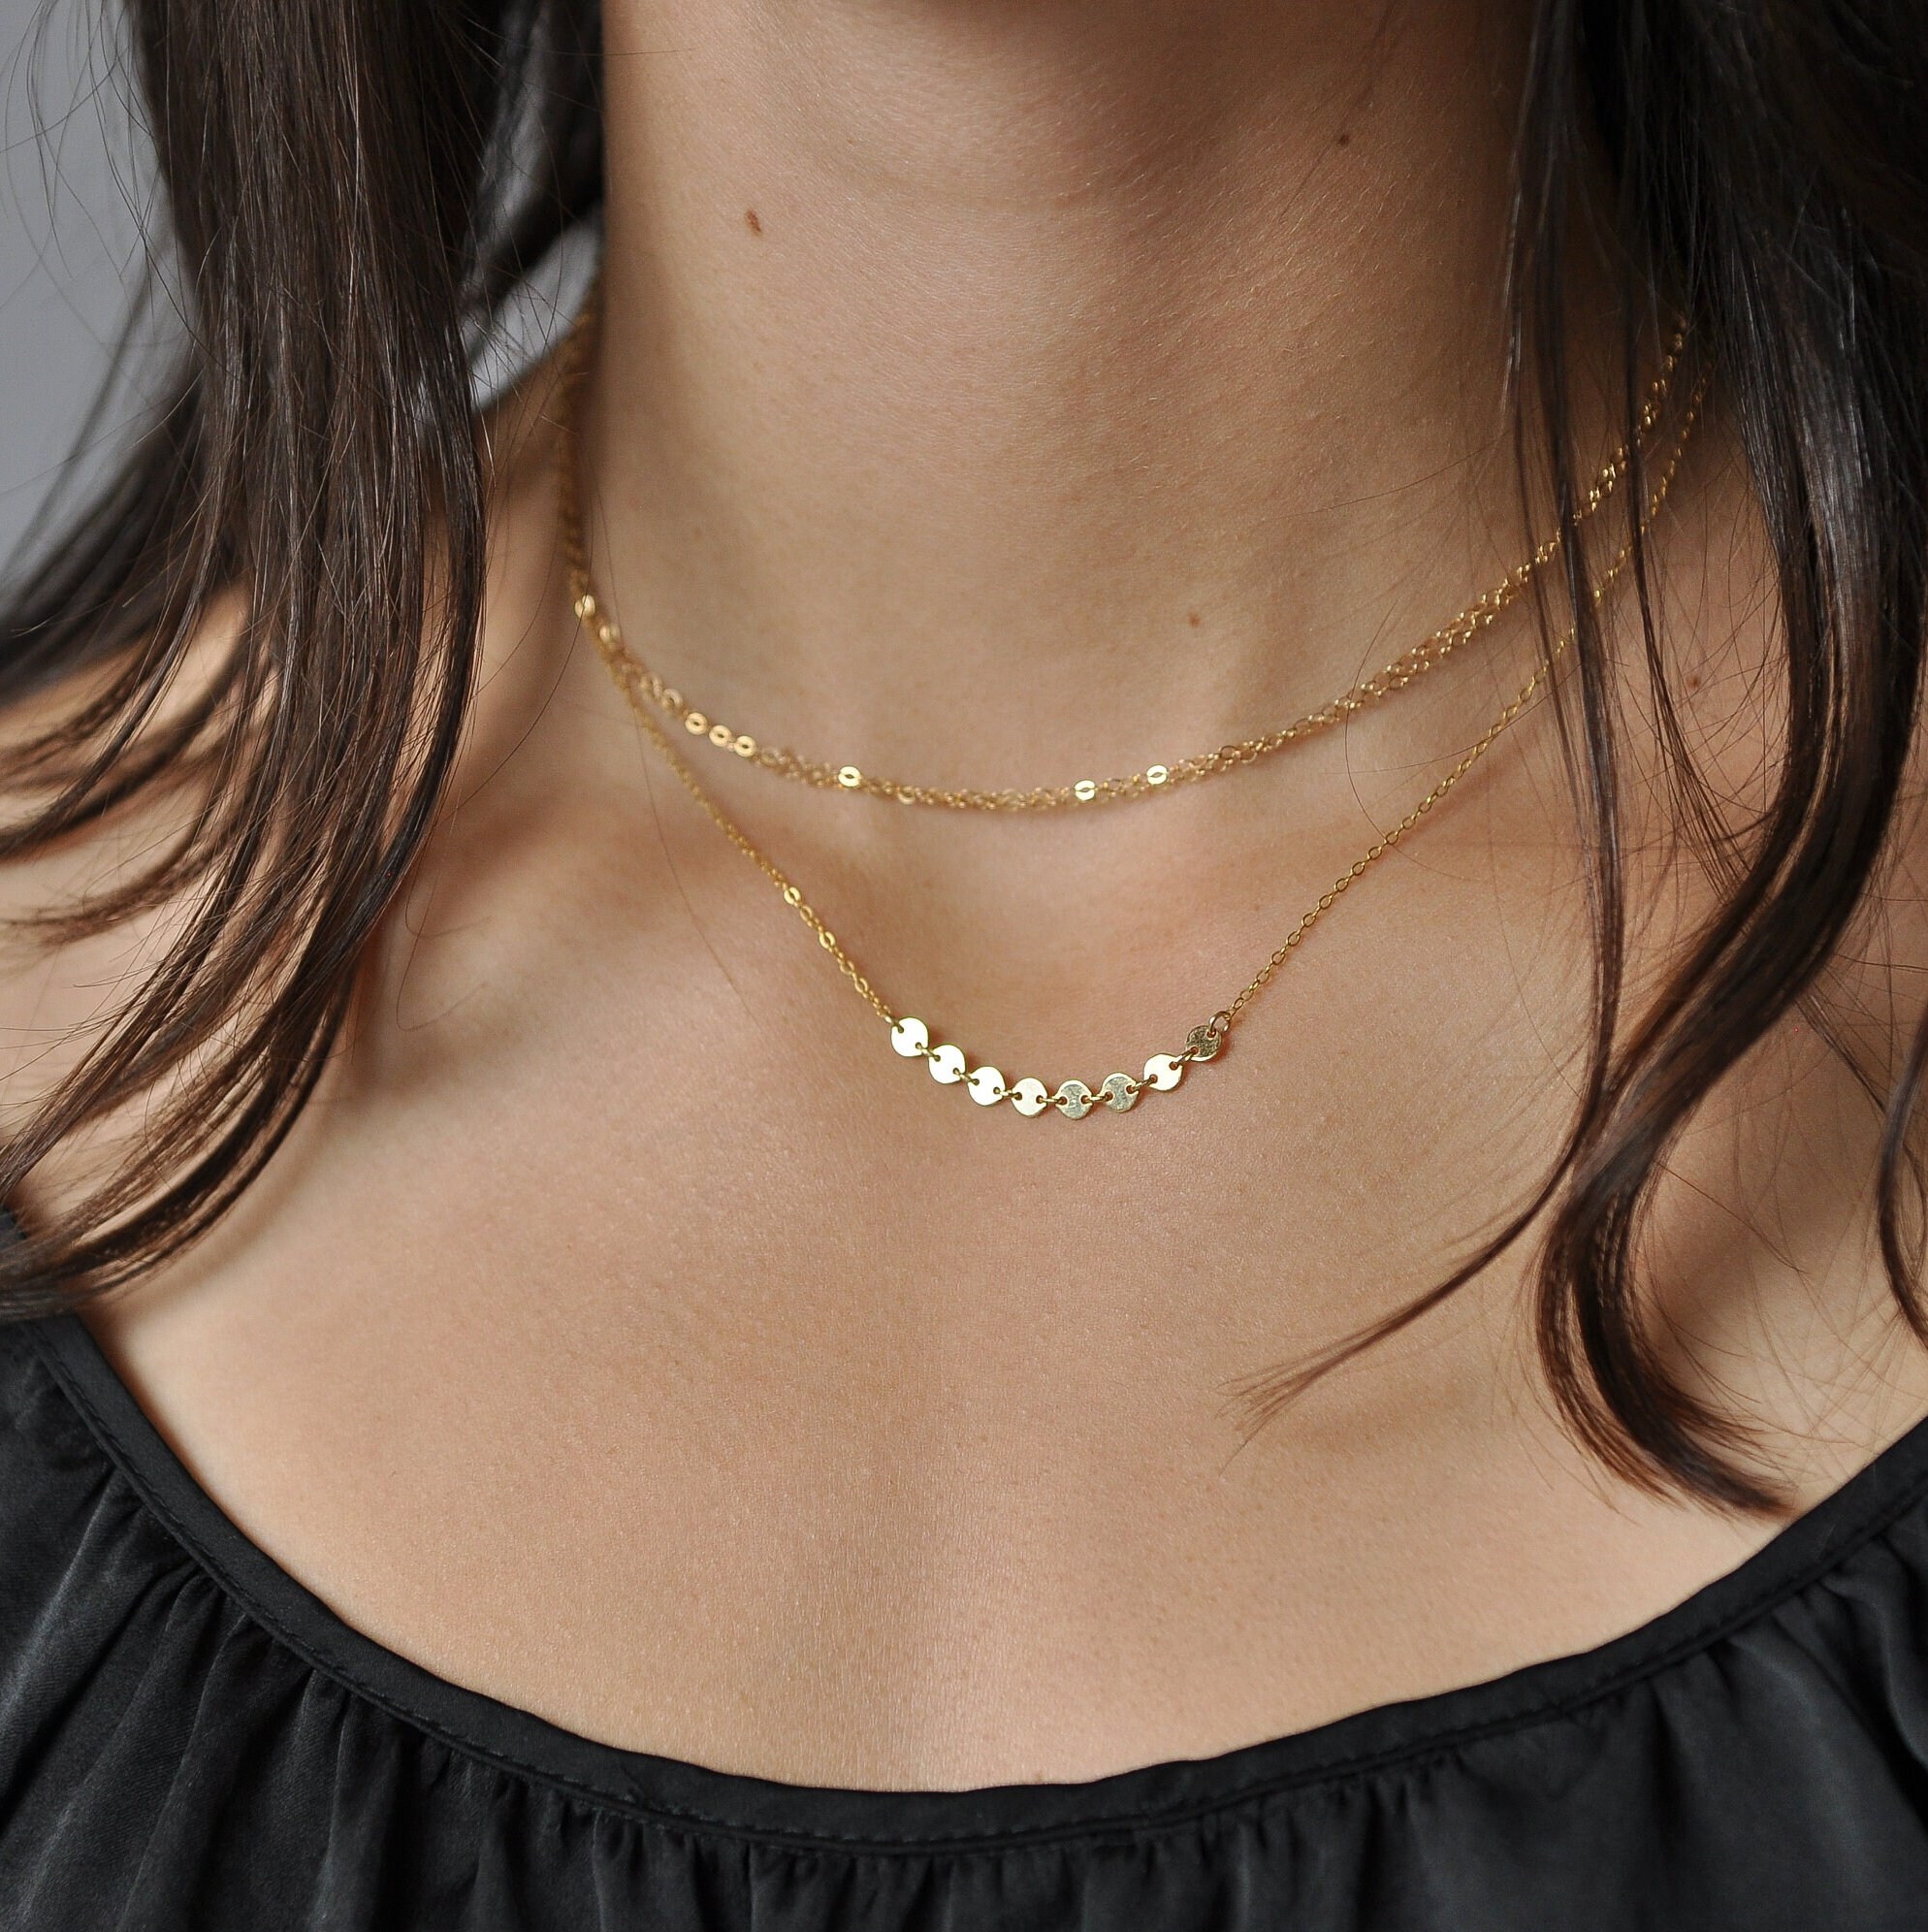 Gold Choker Necklace, Dainty Layered Choker for Women, Layered Necklace Gold Vermeil / Neck Circumference 15in and Above